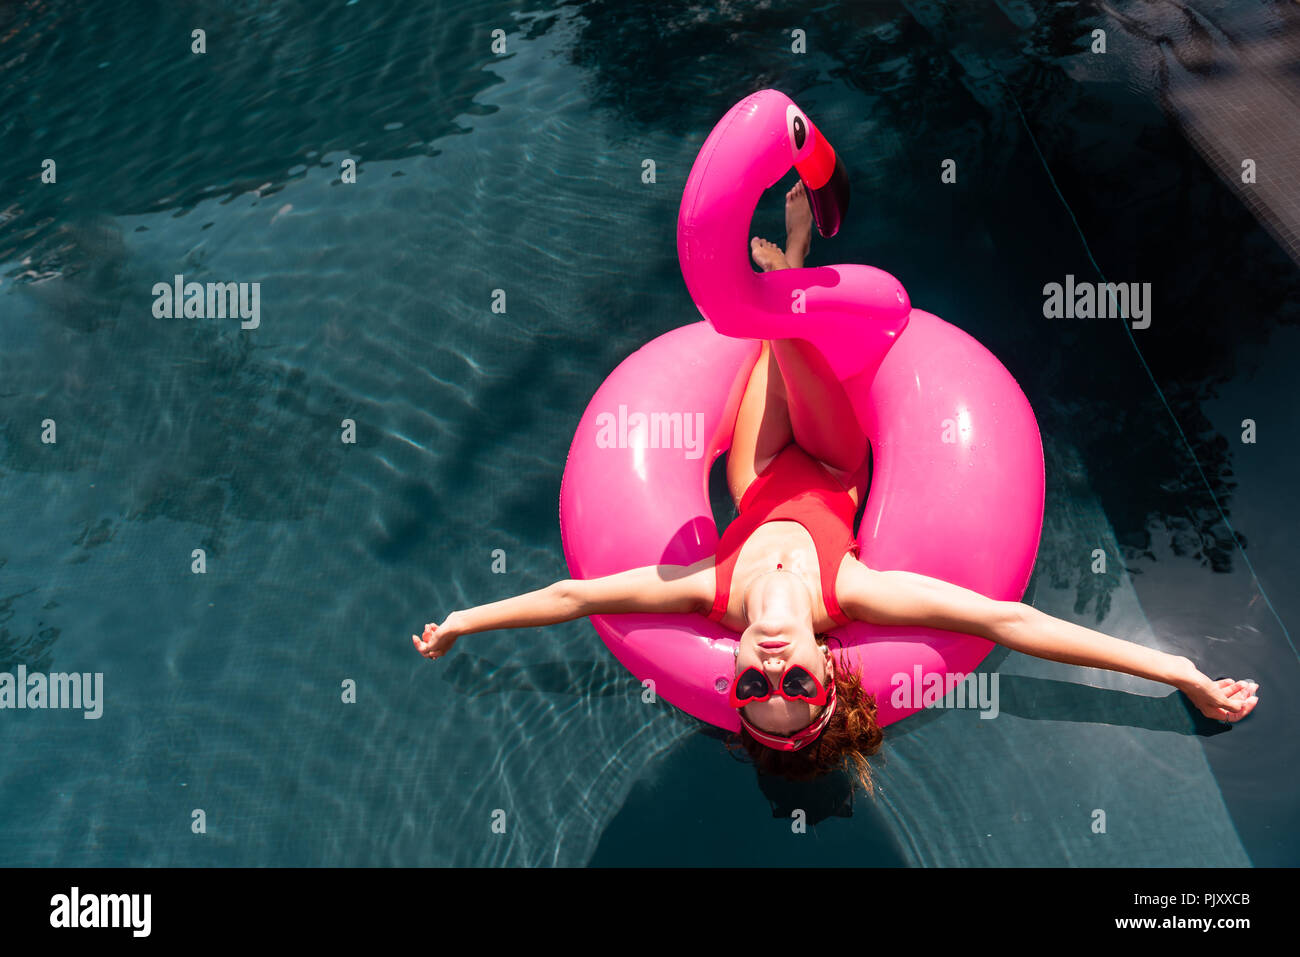 Top view of a happy relaxed woman Stock Photo